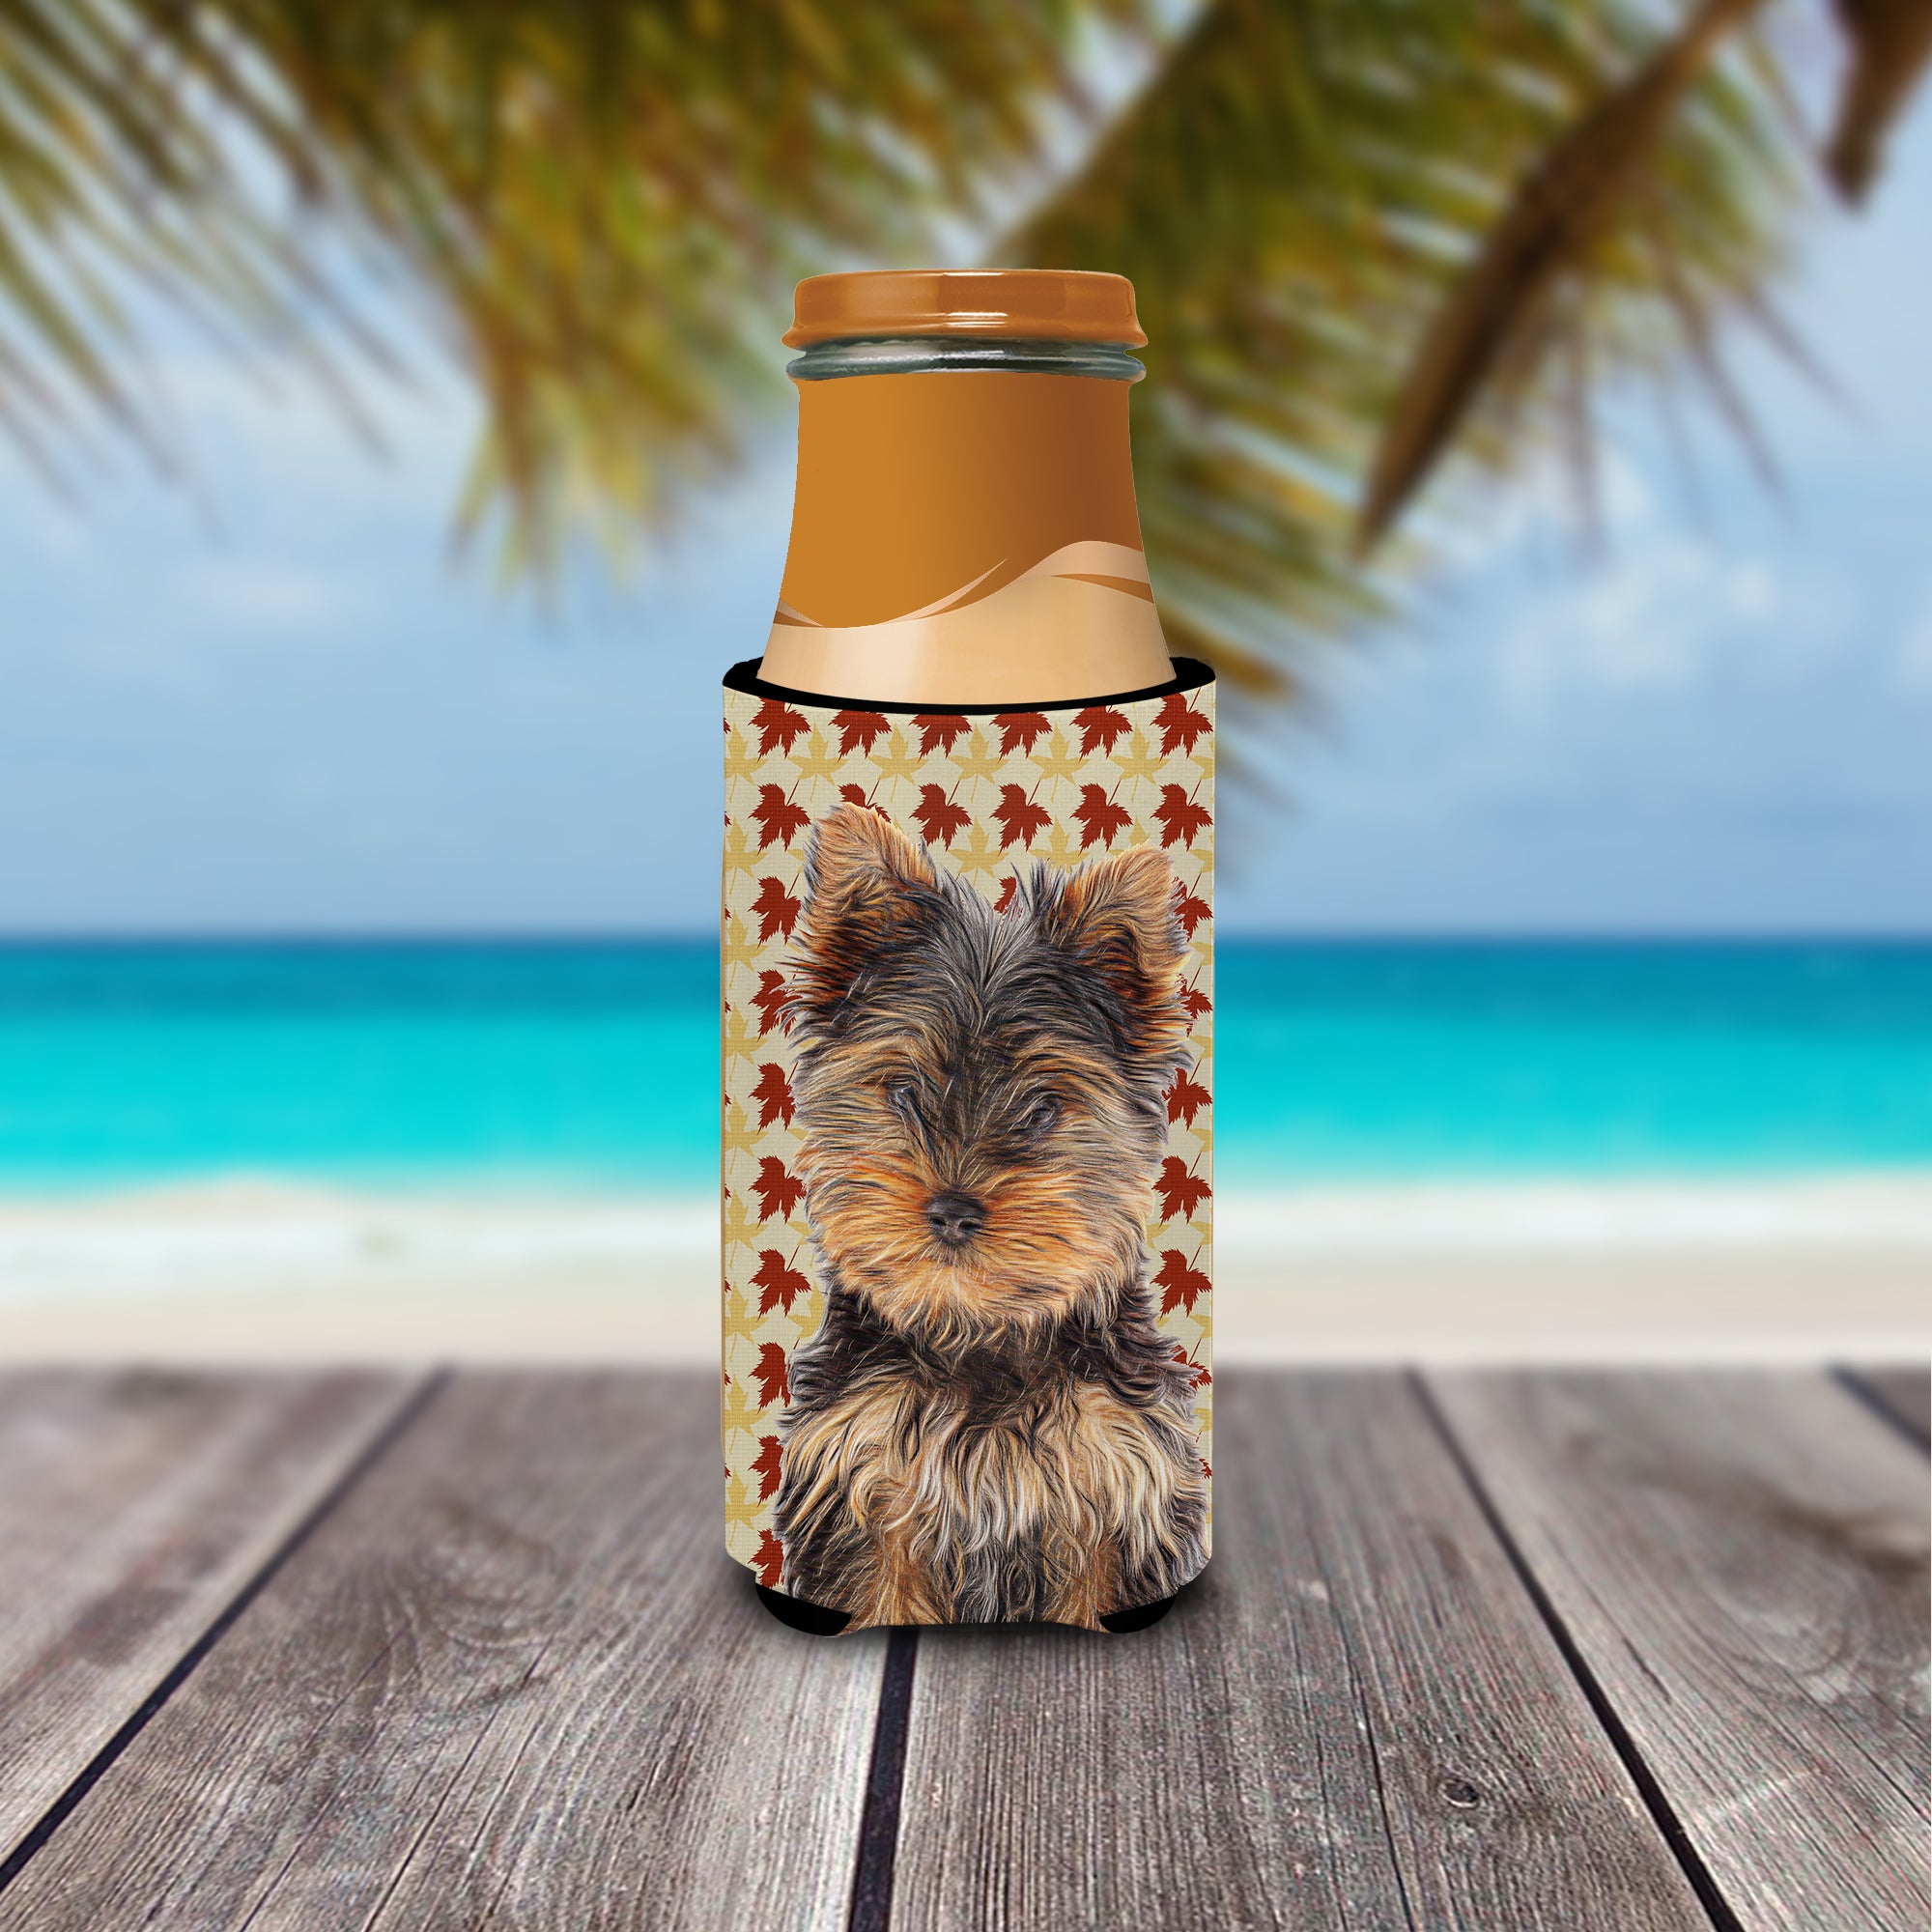 Fall Leaves Yorkie Puppy / Yorkshire Terrier Ultra Beverage Insulators for slim cans KJ1209MUK.